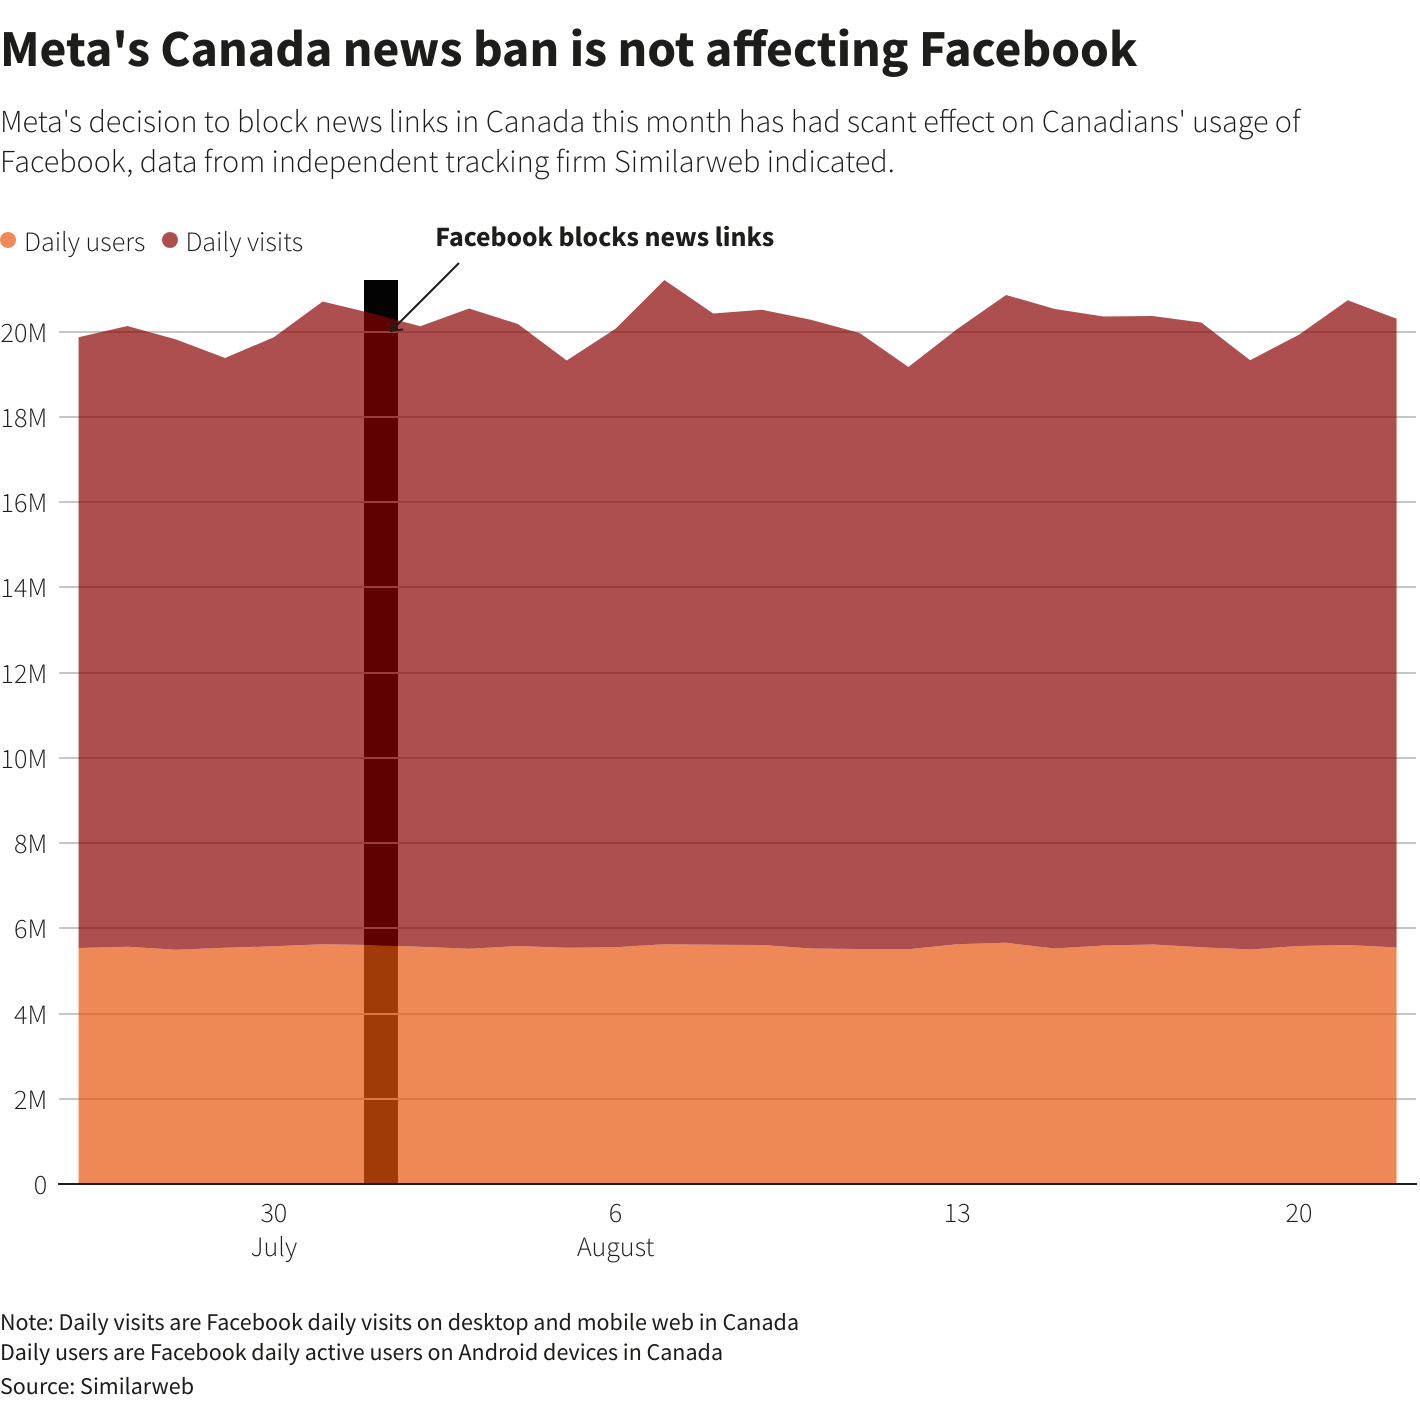 Based on data from independent tracking firm Similarweb, Meta's decision to block news links in Canada this month has had scant effect on Canadians' usage of Facebook. Note that daily users are Facebook daily active users on Android devices in Canada.